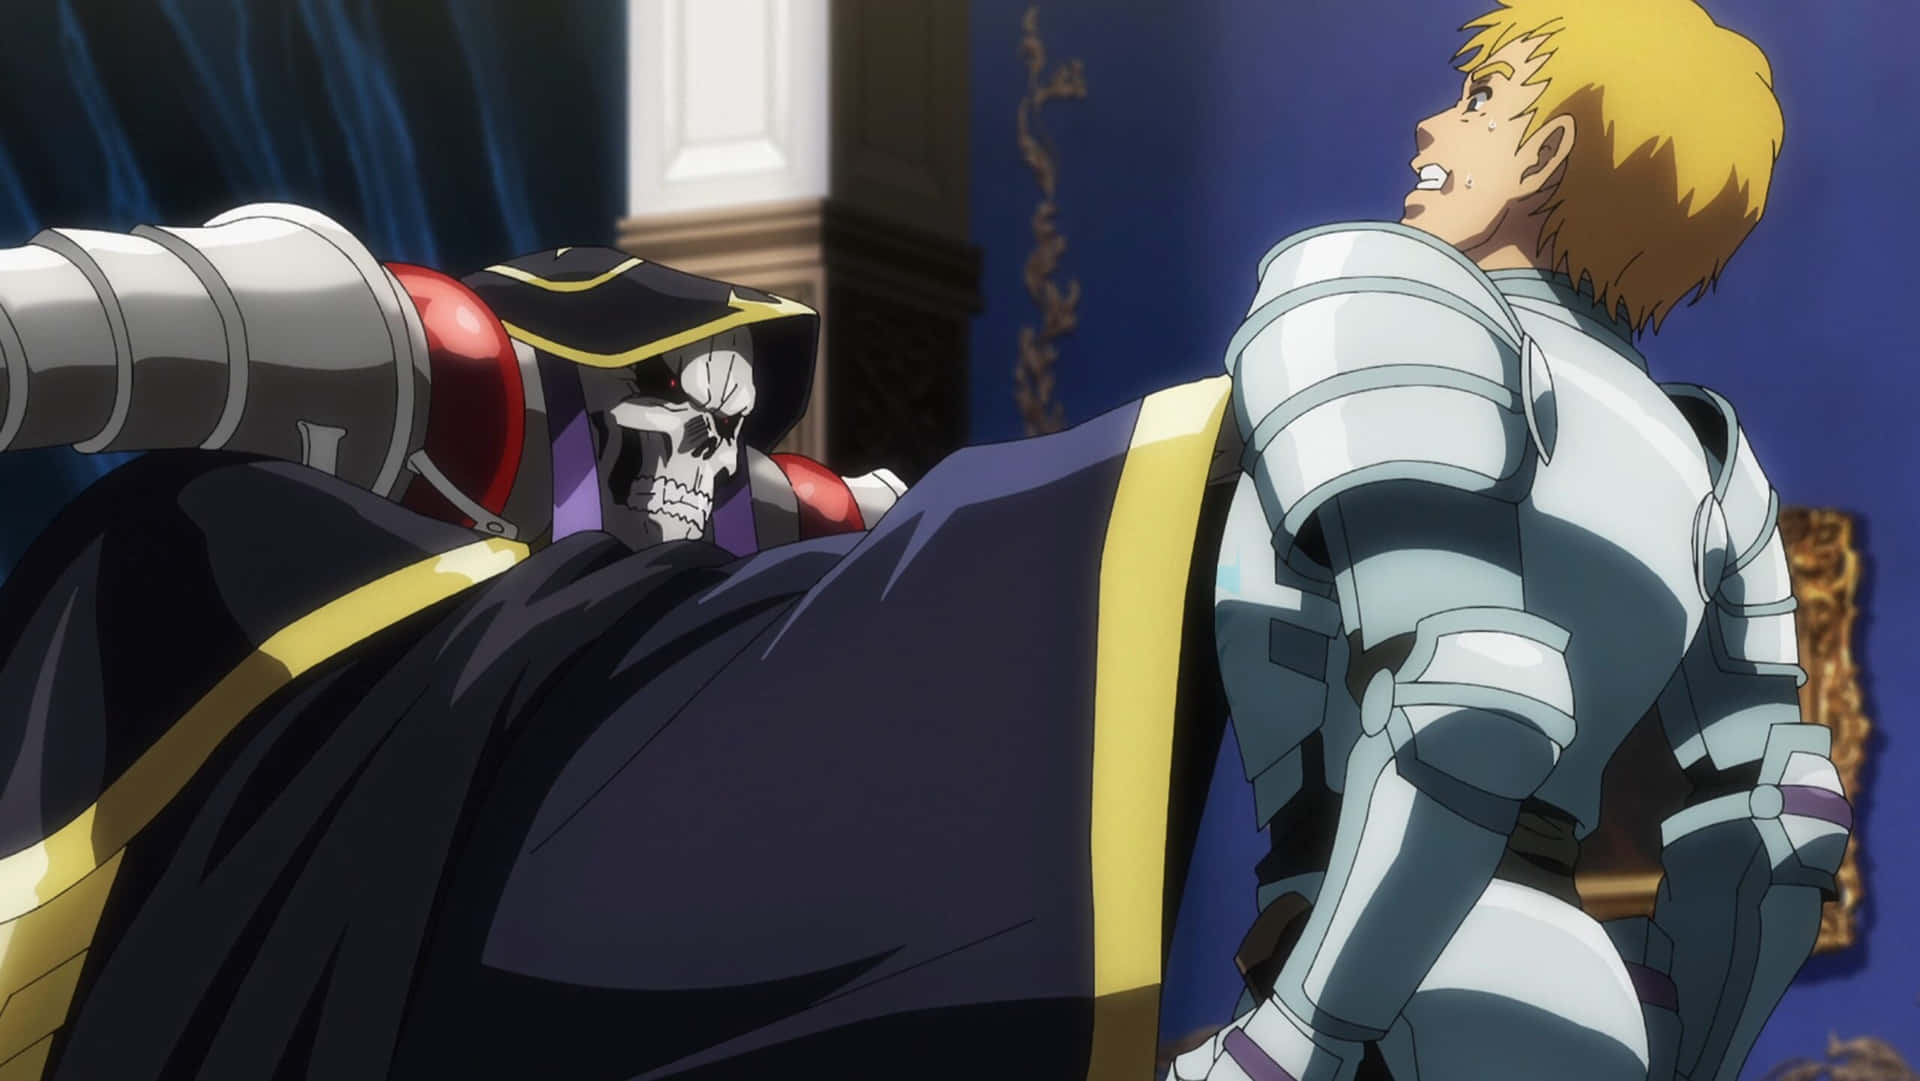 Imagende Overlord Ainz Ooal Gown Vs. Climb